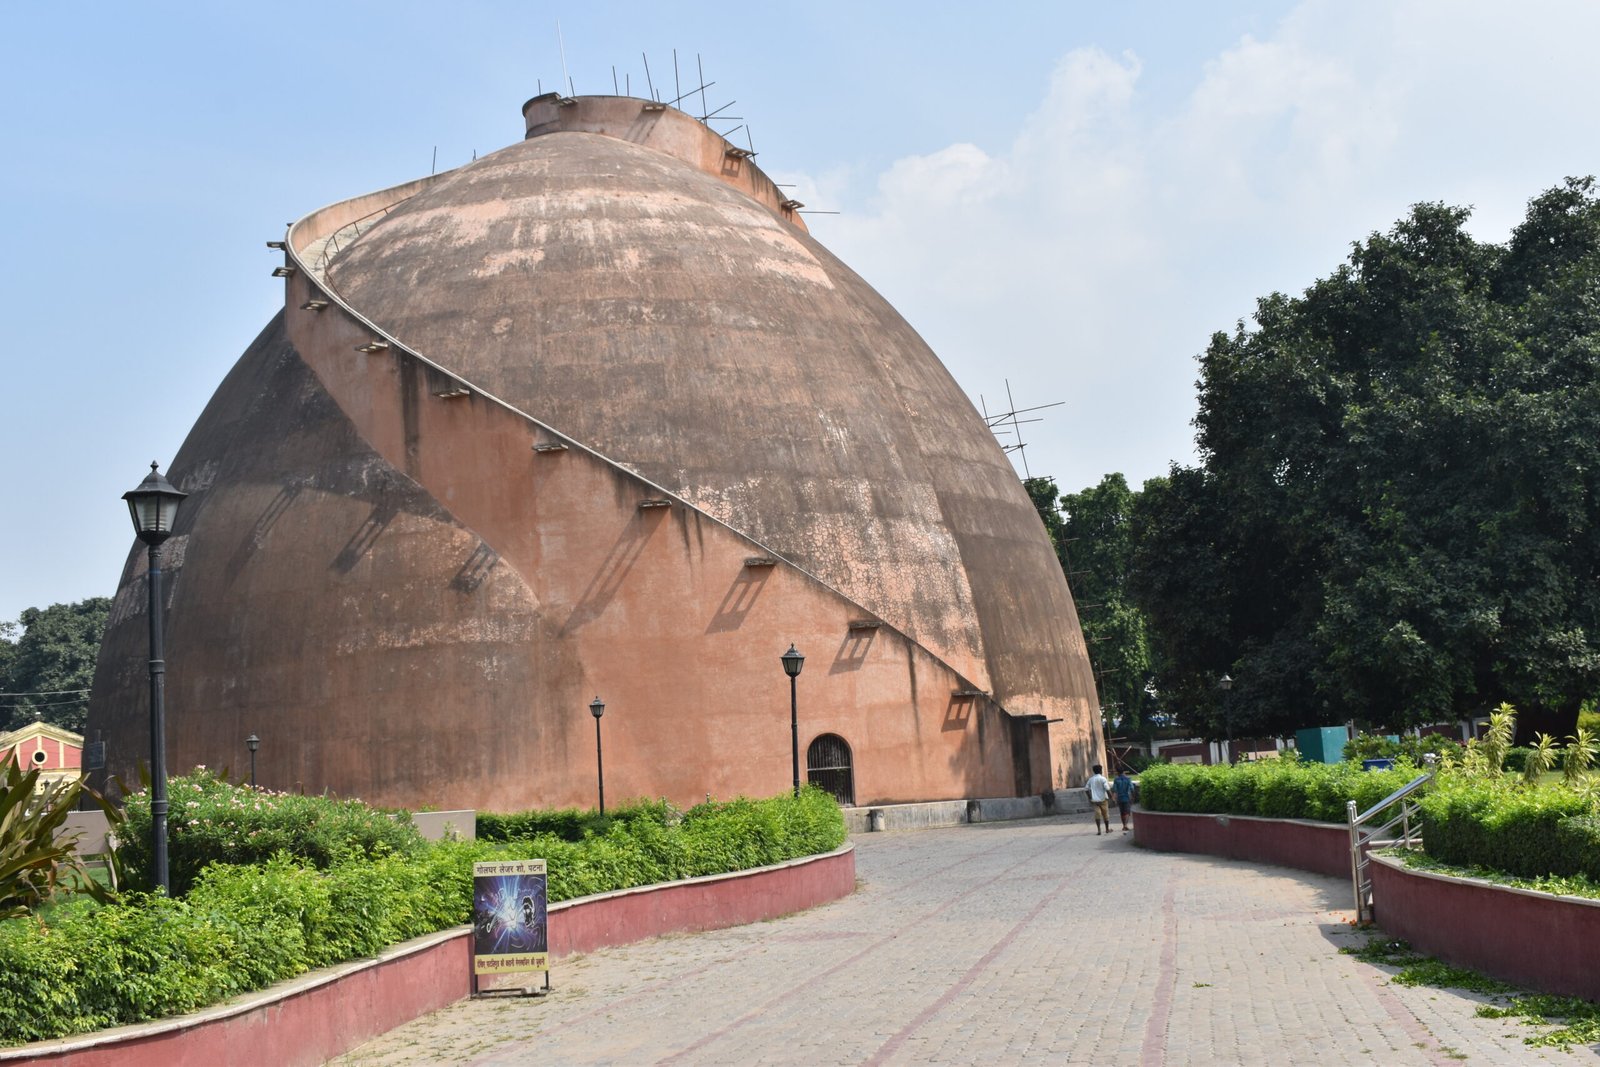 Patna’s Golghar is 236 years old | The Golghar of Patna still remains a center of attraction for people today